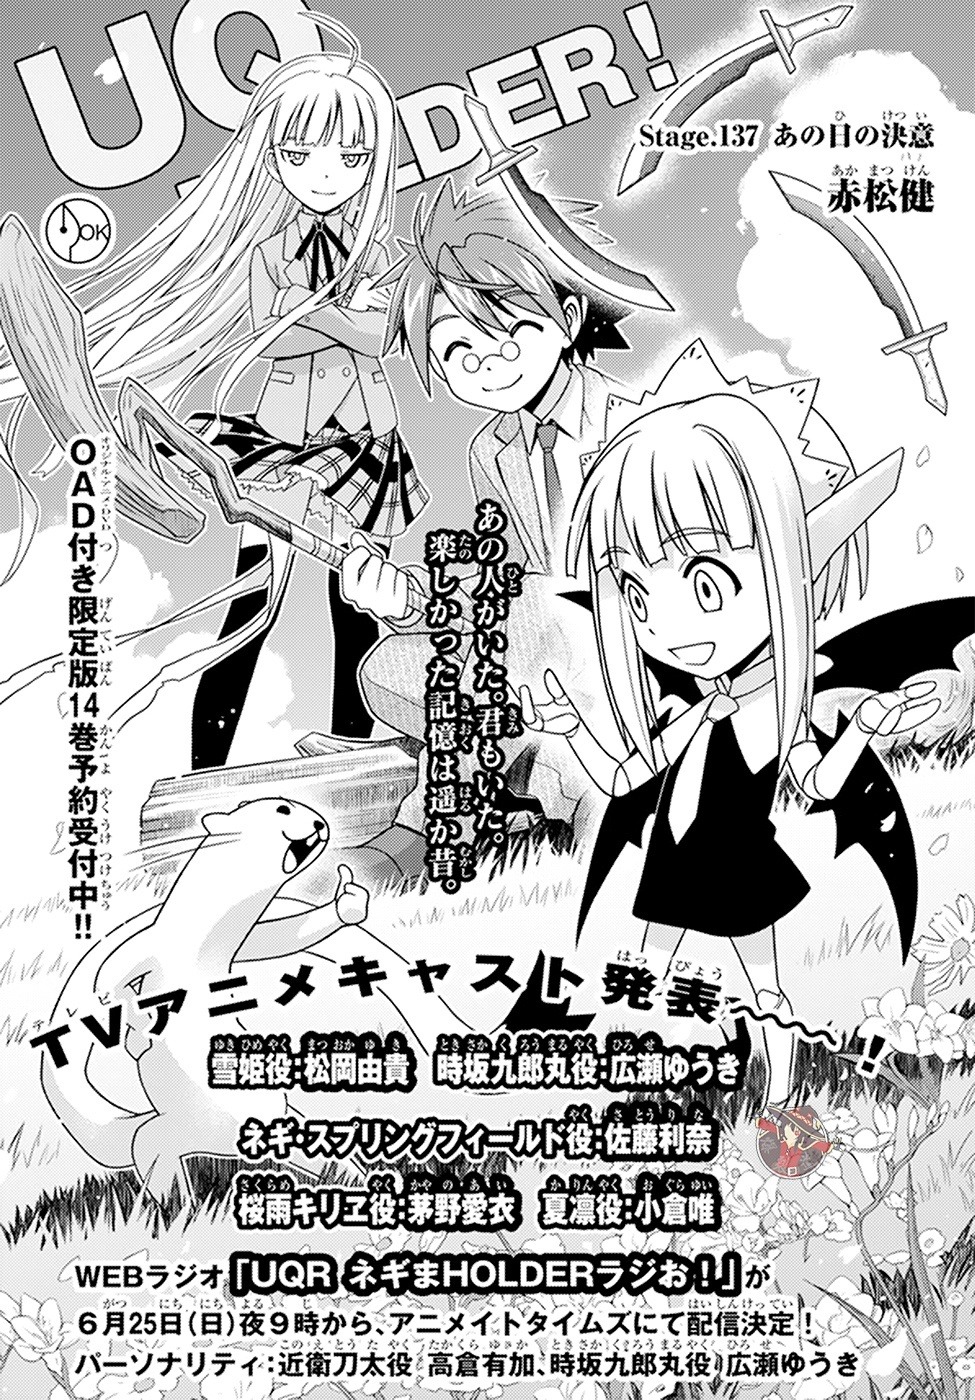 Featured image of post Uq Holder Episode 1 Crunchyroll Only by an image of higher quality with the same licensing status other information crunchyroll manga